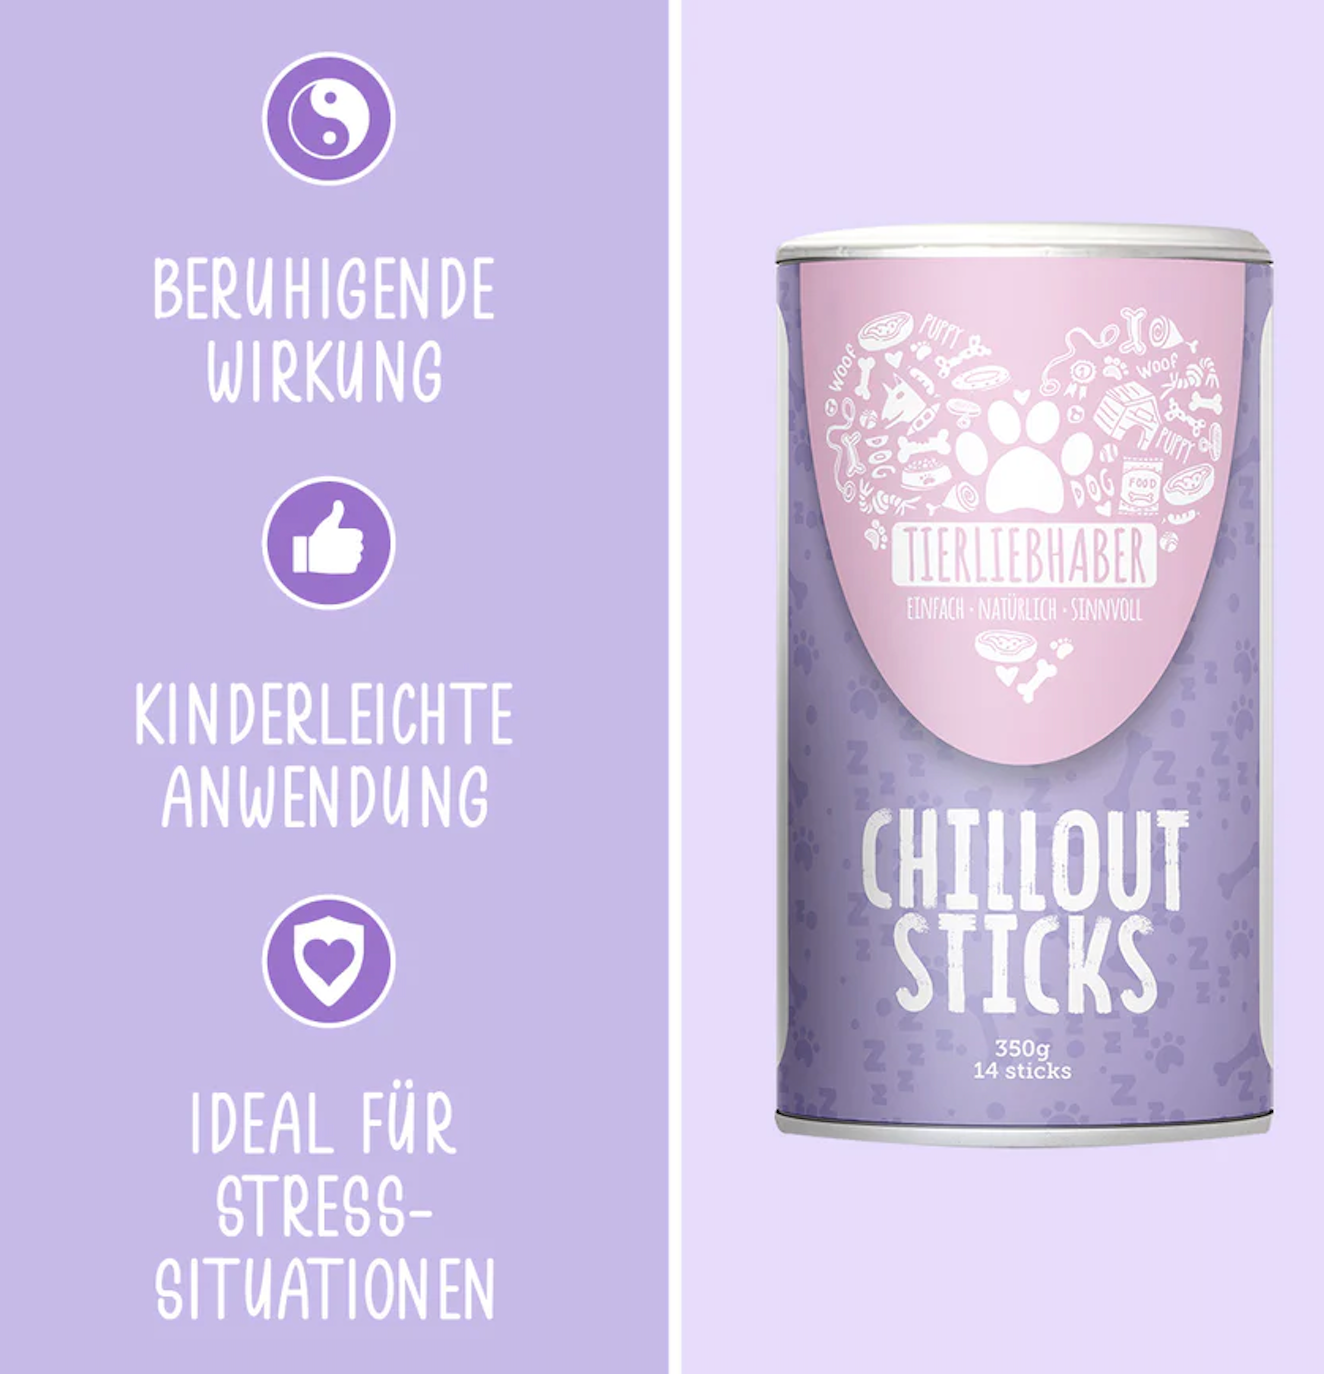 Chill out sticks